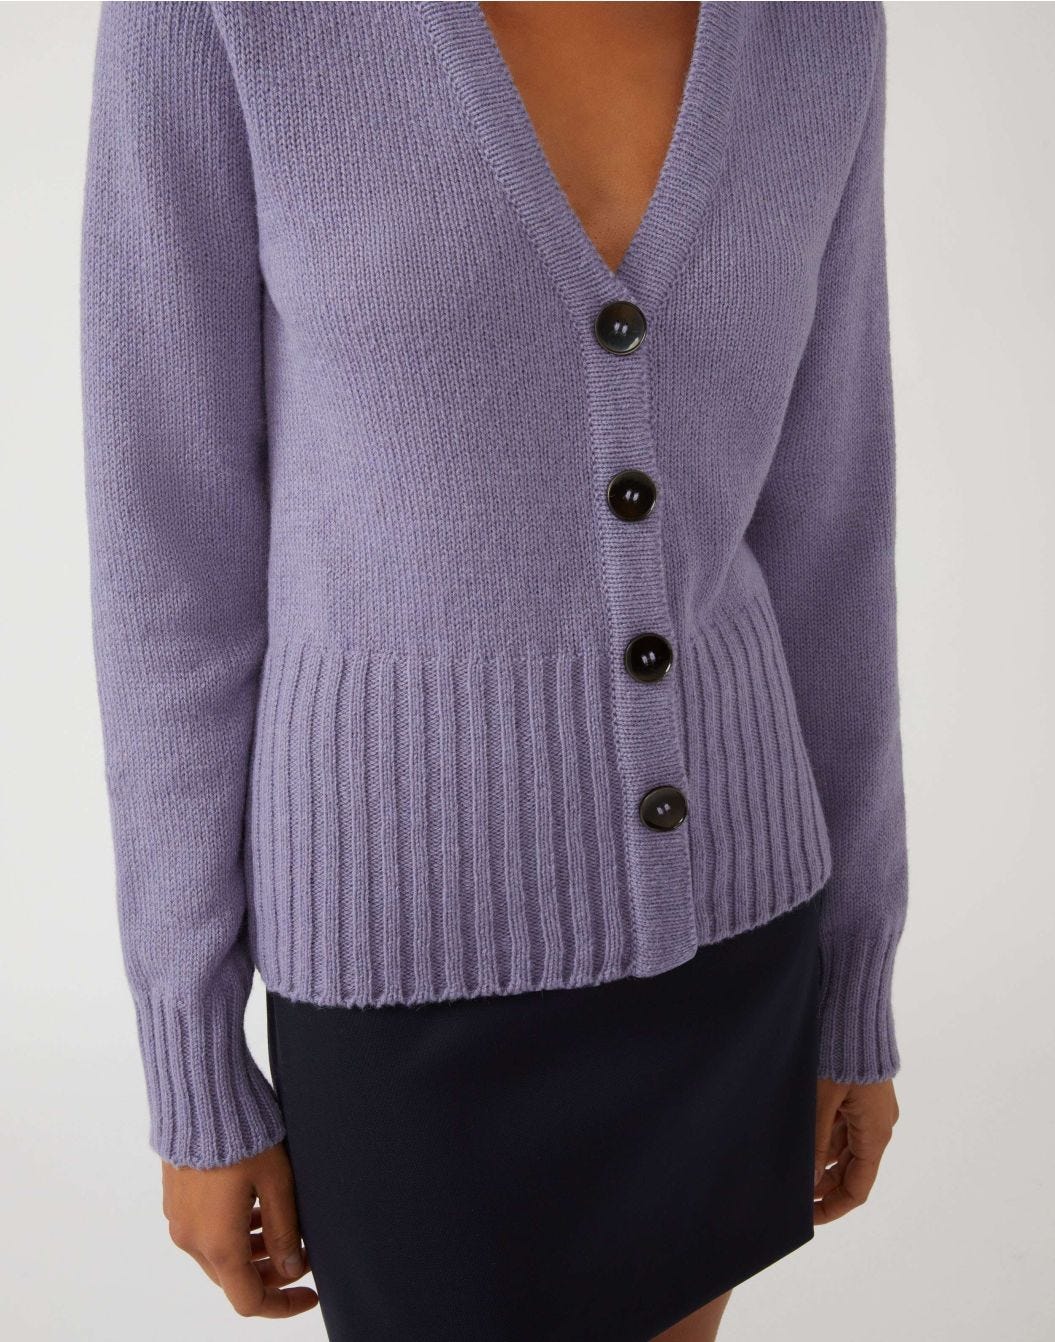 Cropped cardigan in lilac baby alpaca